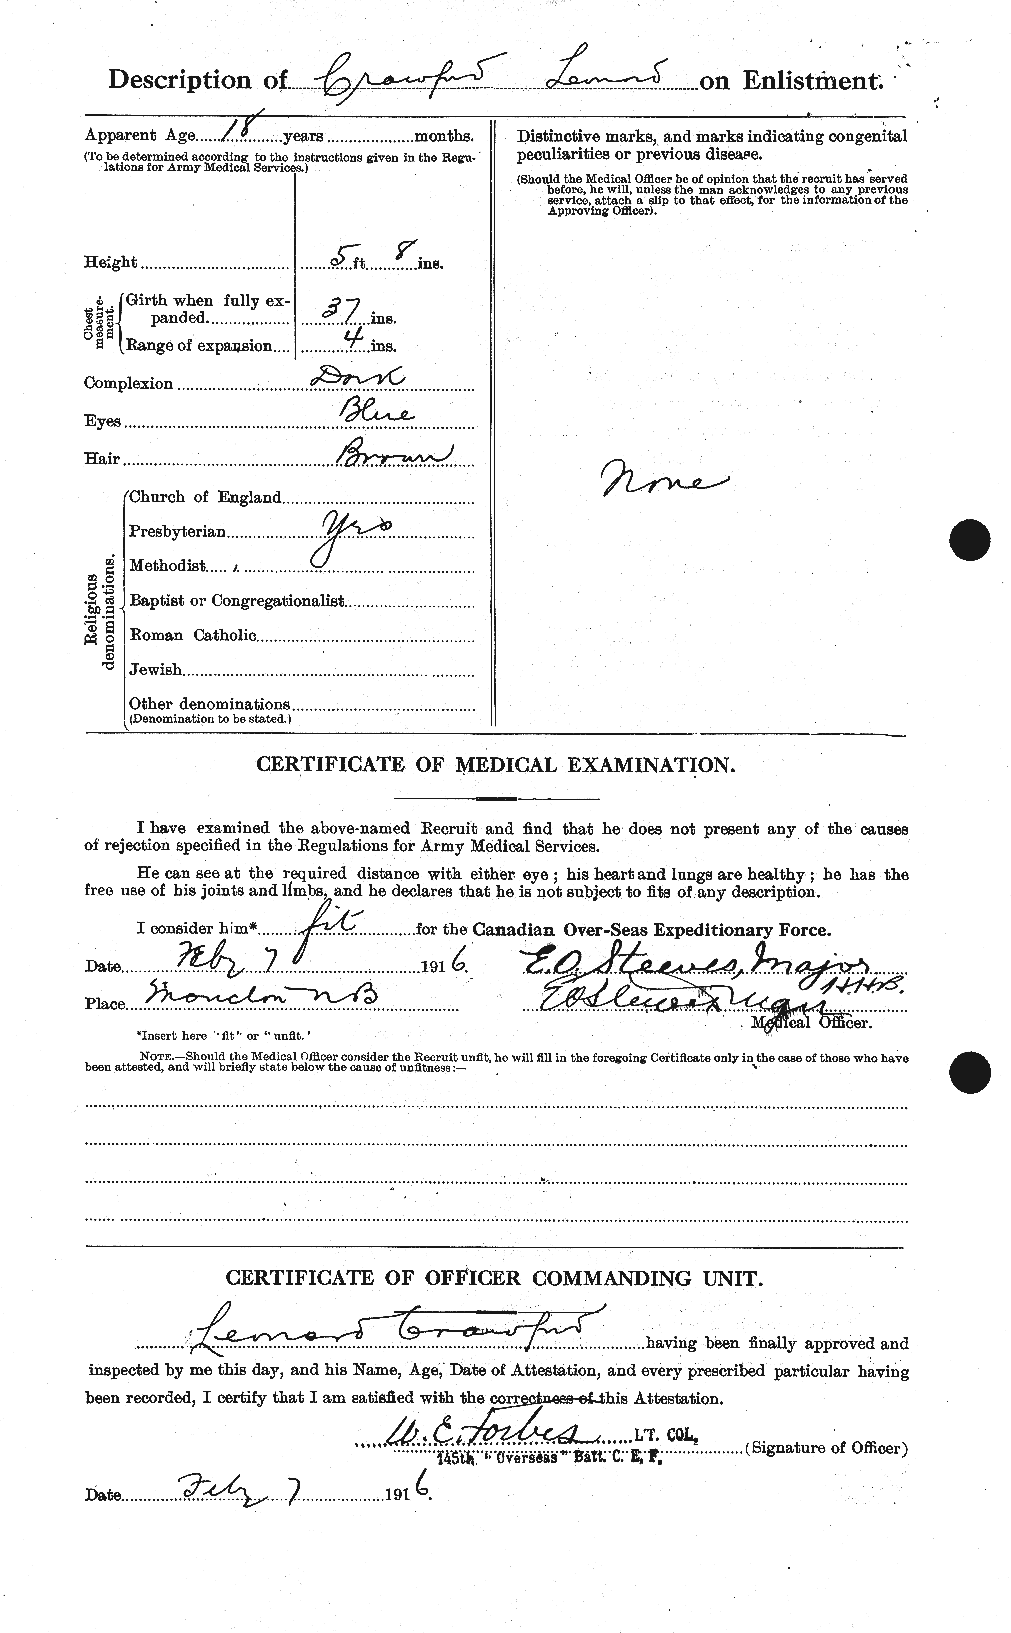 Personnel Records of the First World War - CEF 061797b